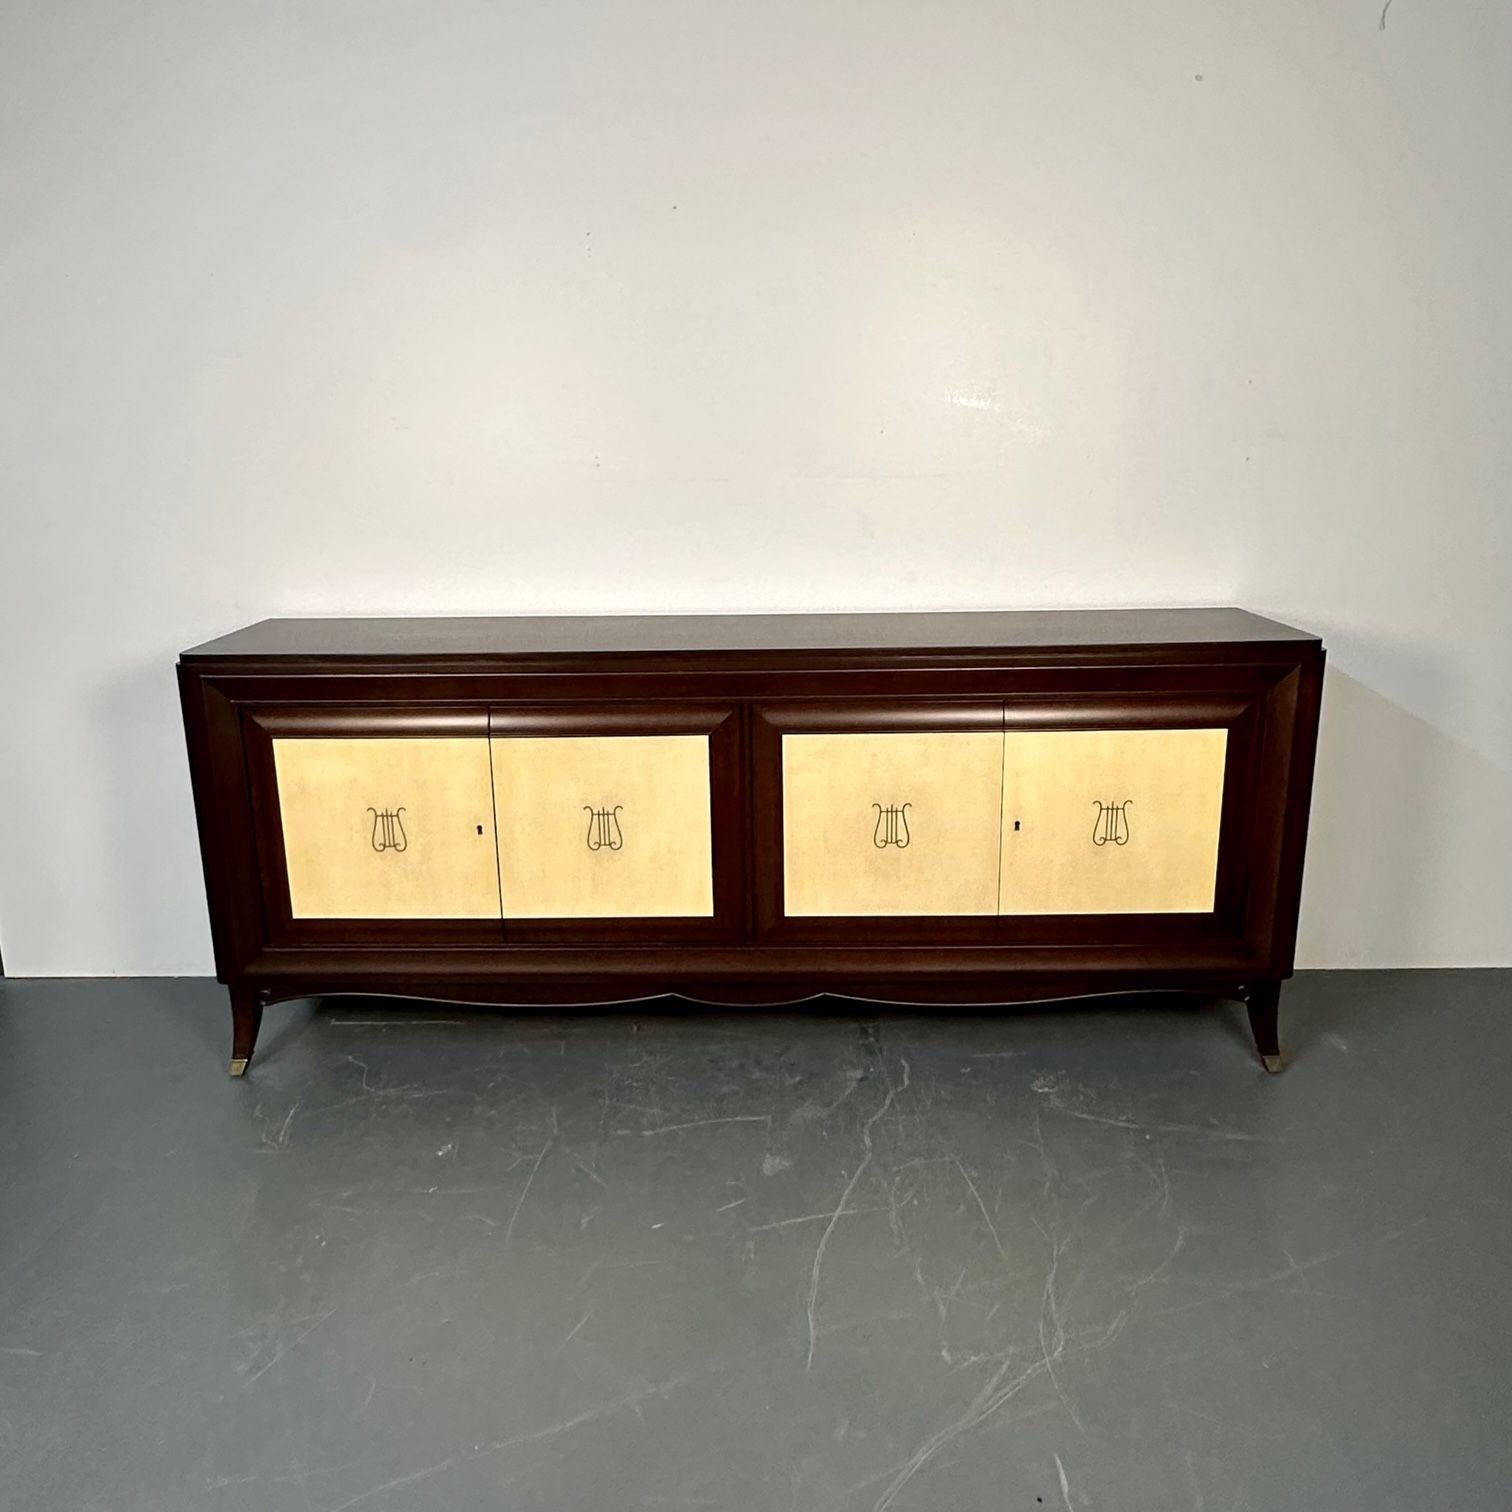 20th Century Italian Midcentury Sideboard / Credenza / Cabinet, Parchment, Mahogany, 1950s For Sale